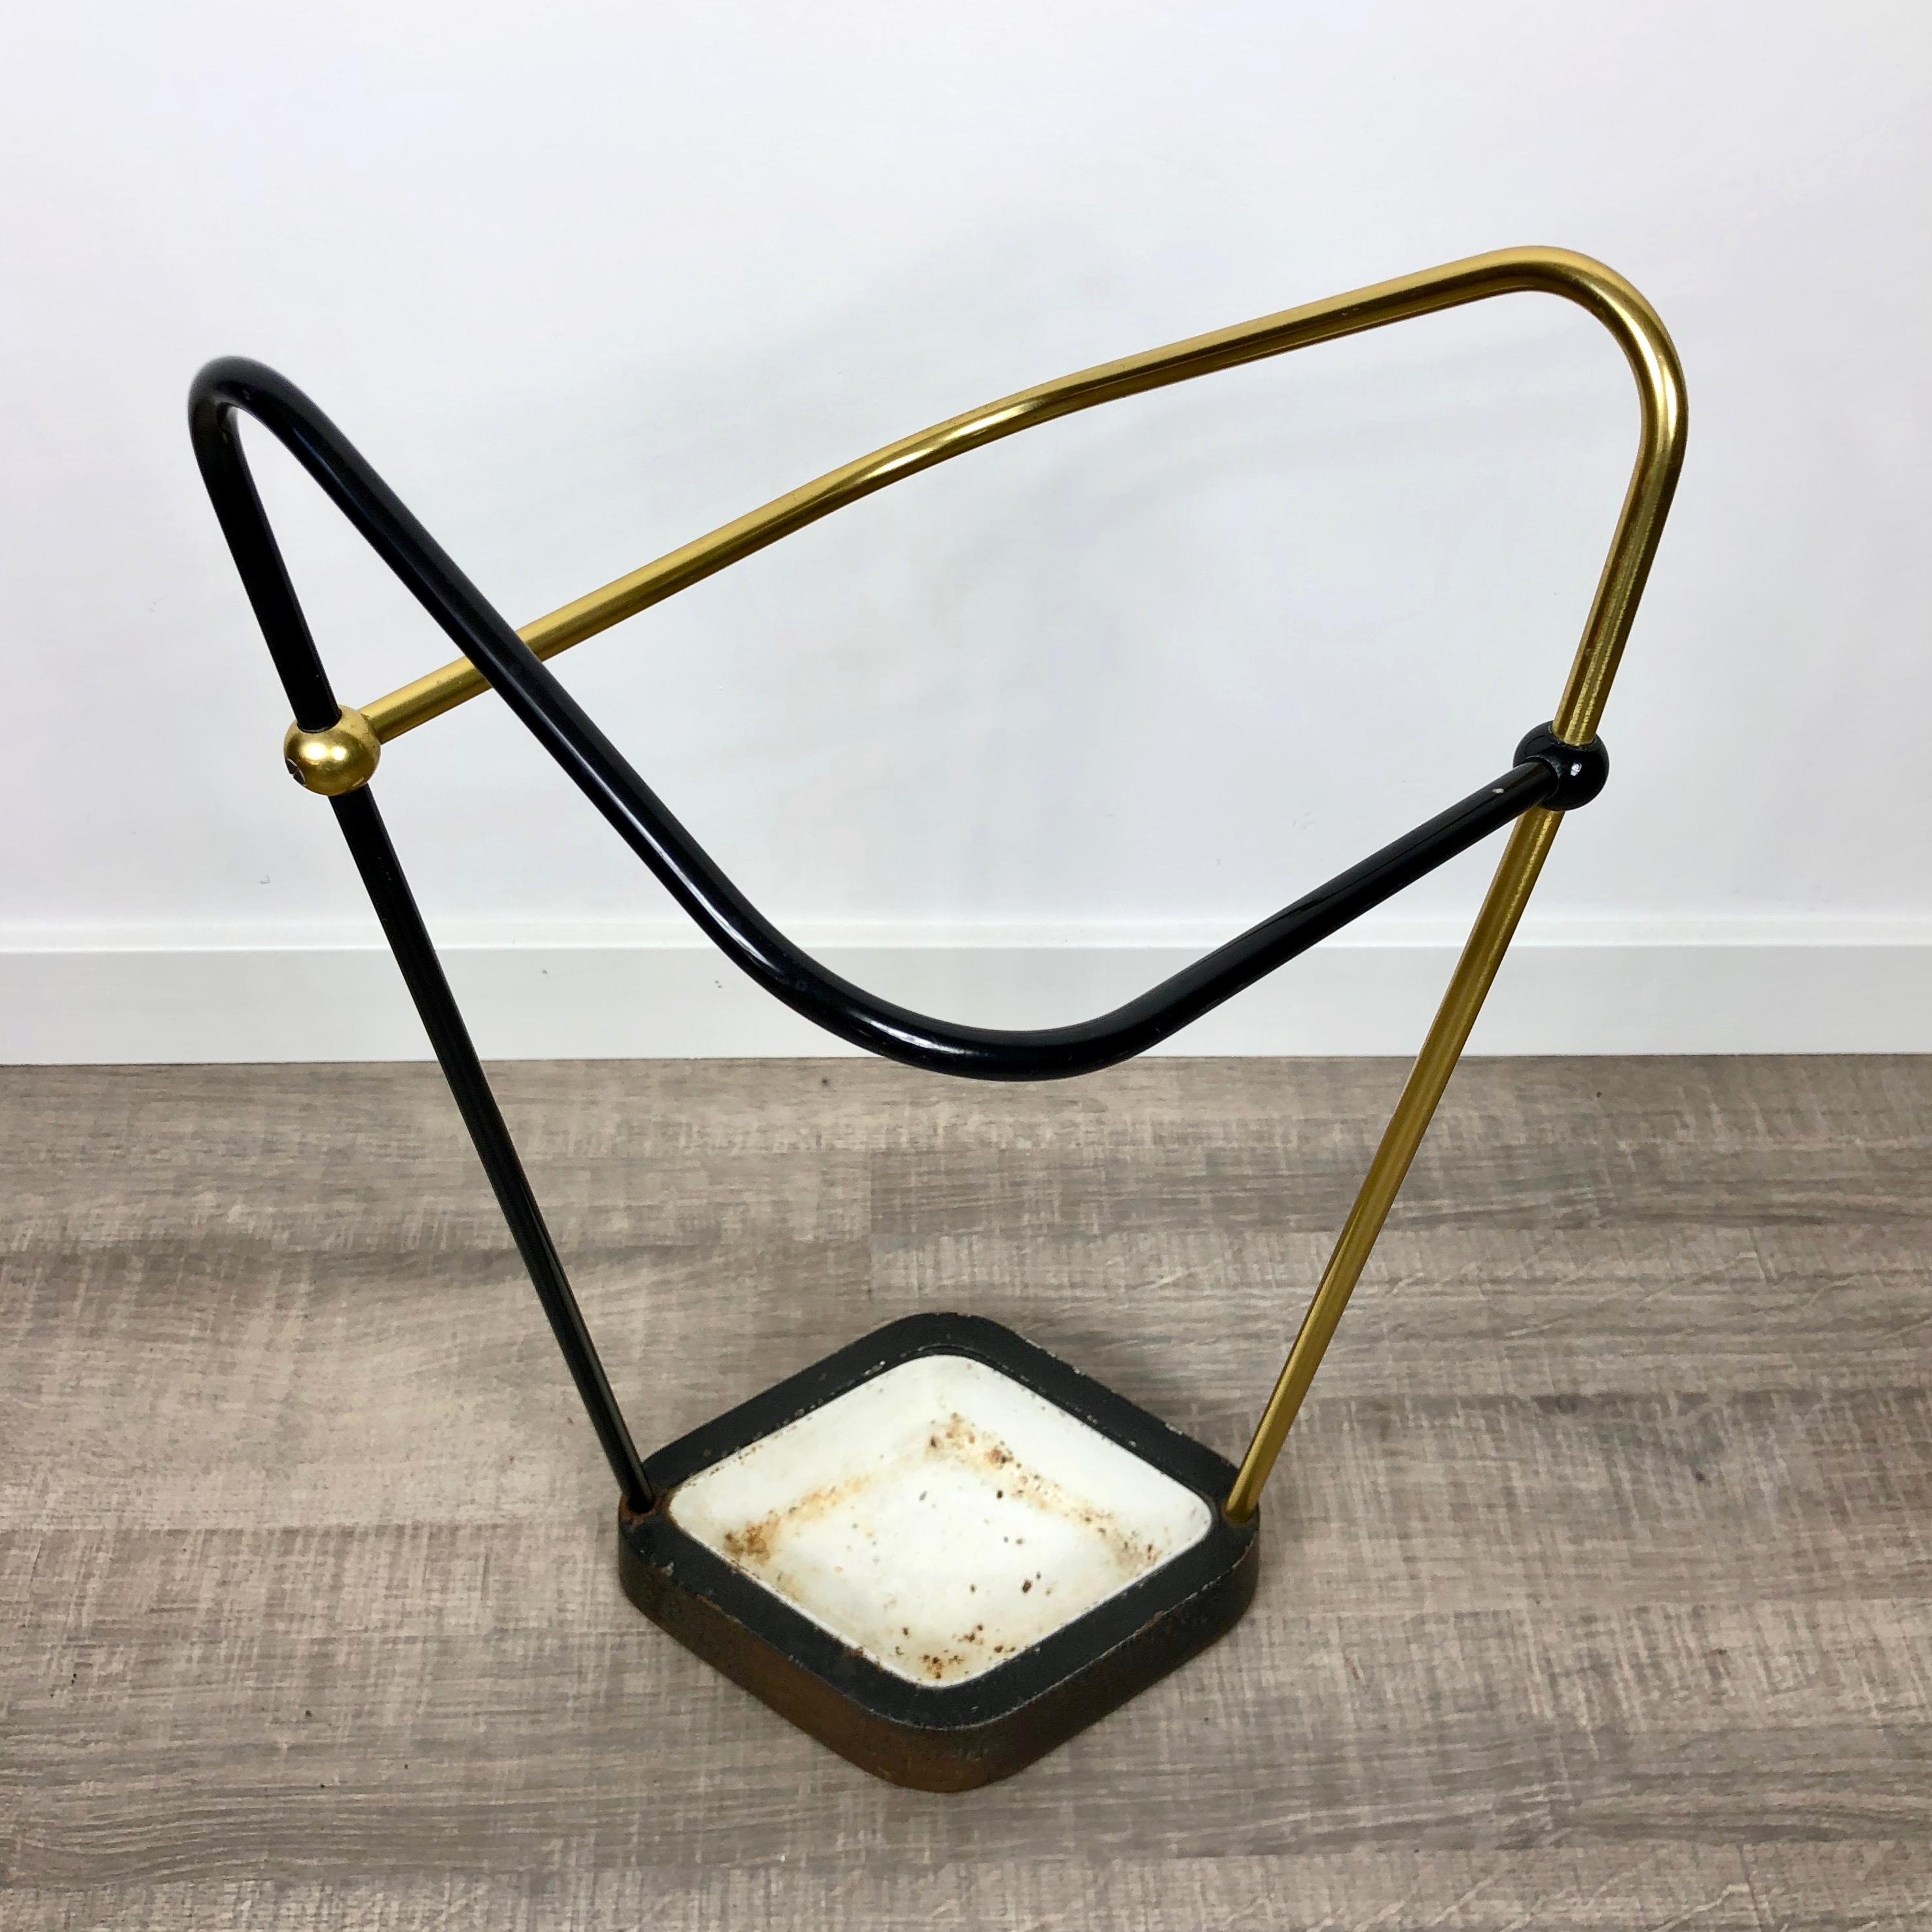 Metal Umbrella Stand in Brought Iron, Brass, Aluminium, Bauhaus style, Germany, 1950s For Sale